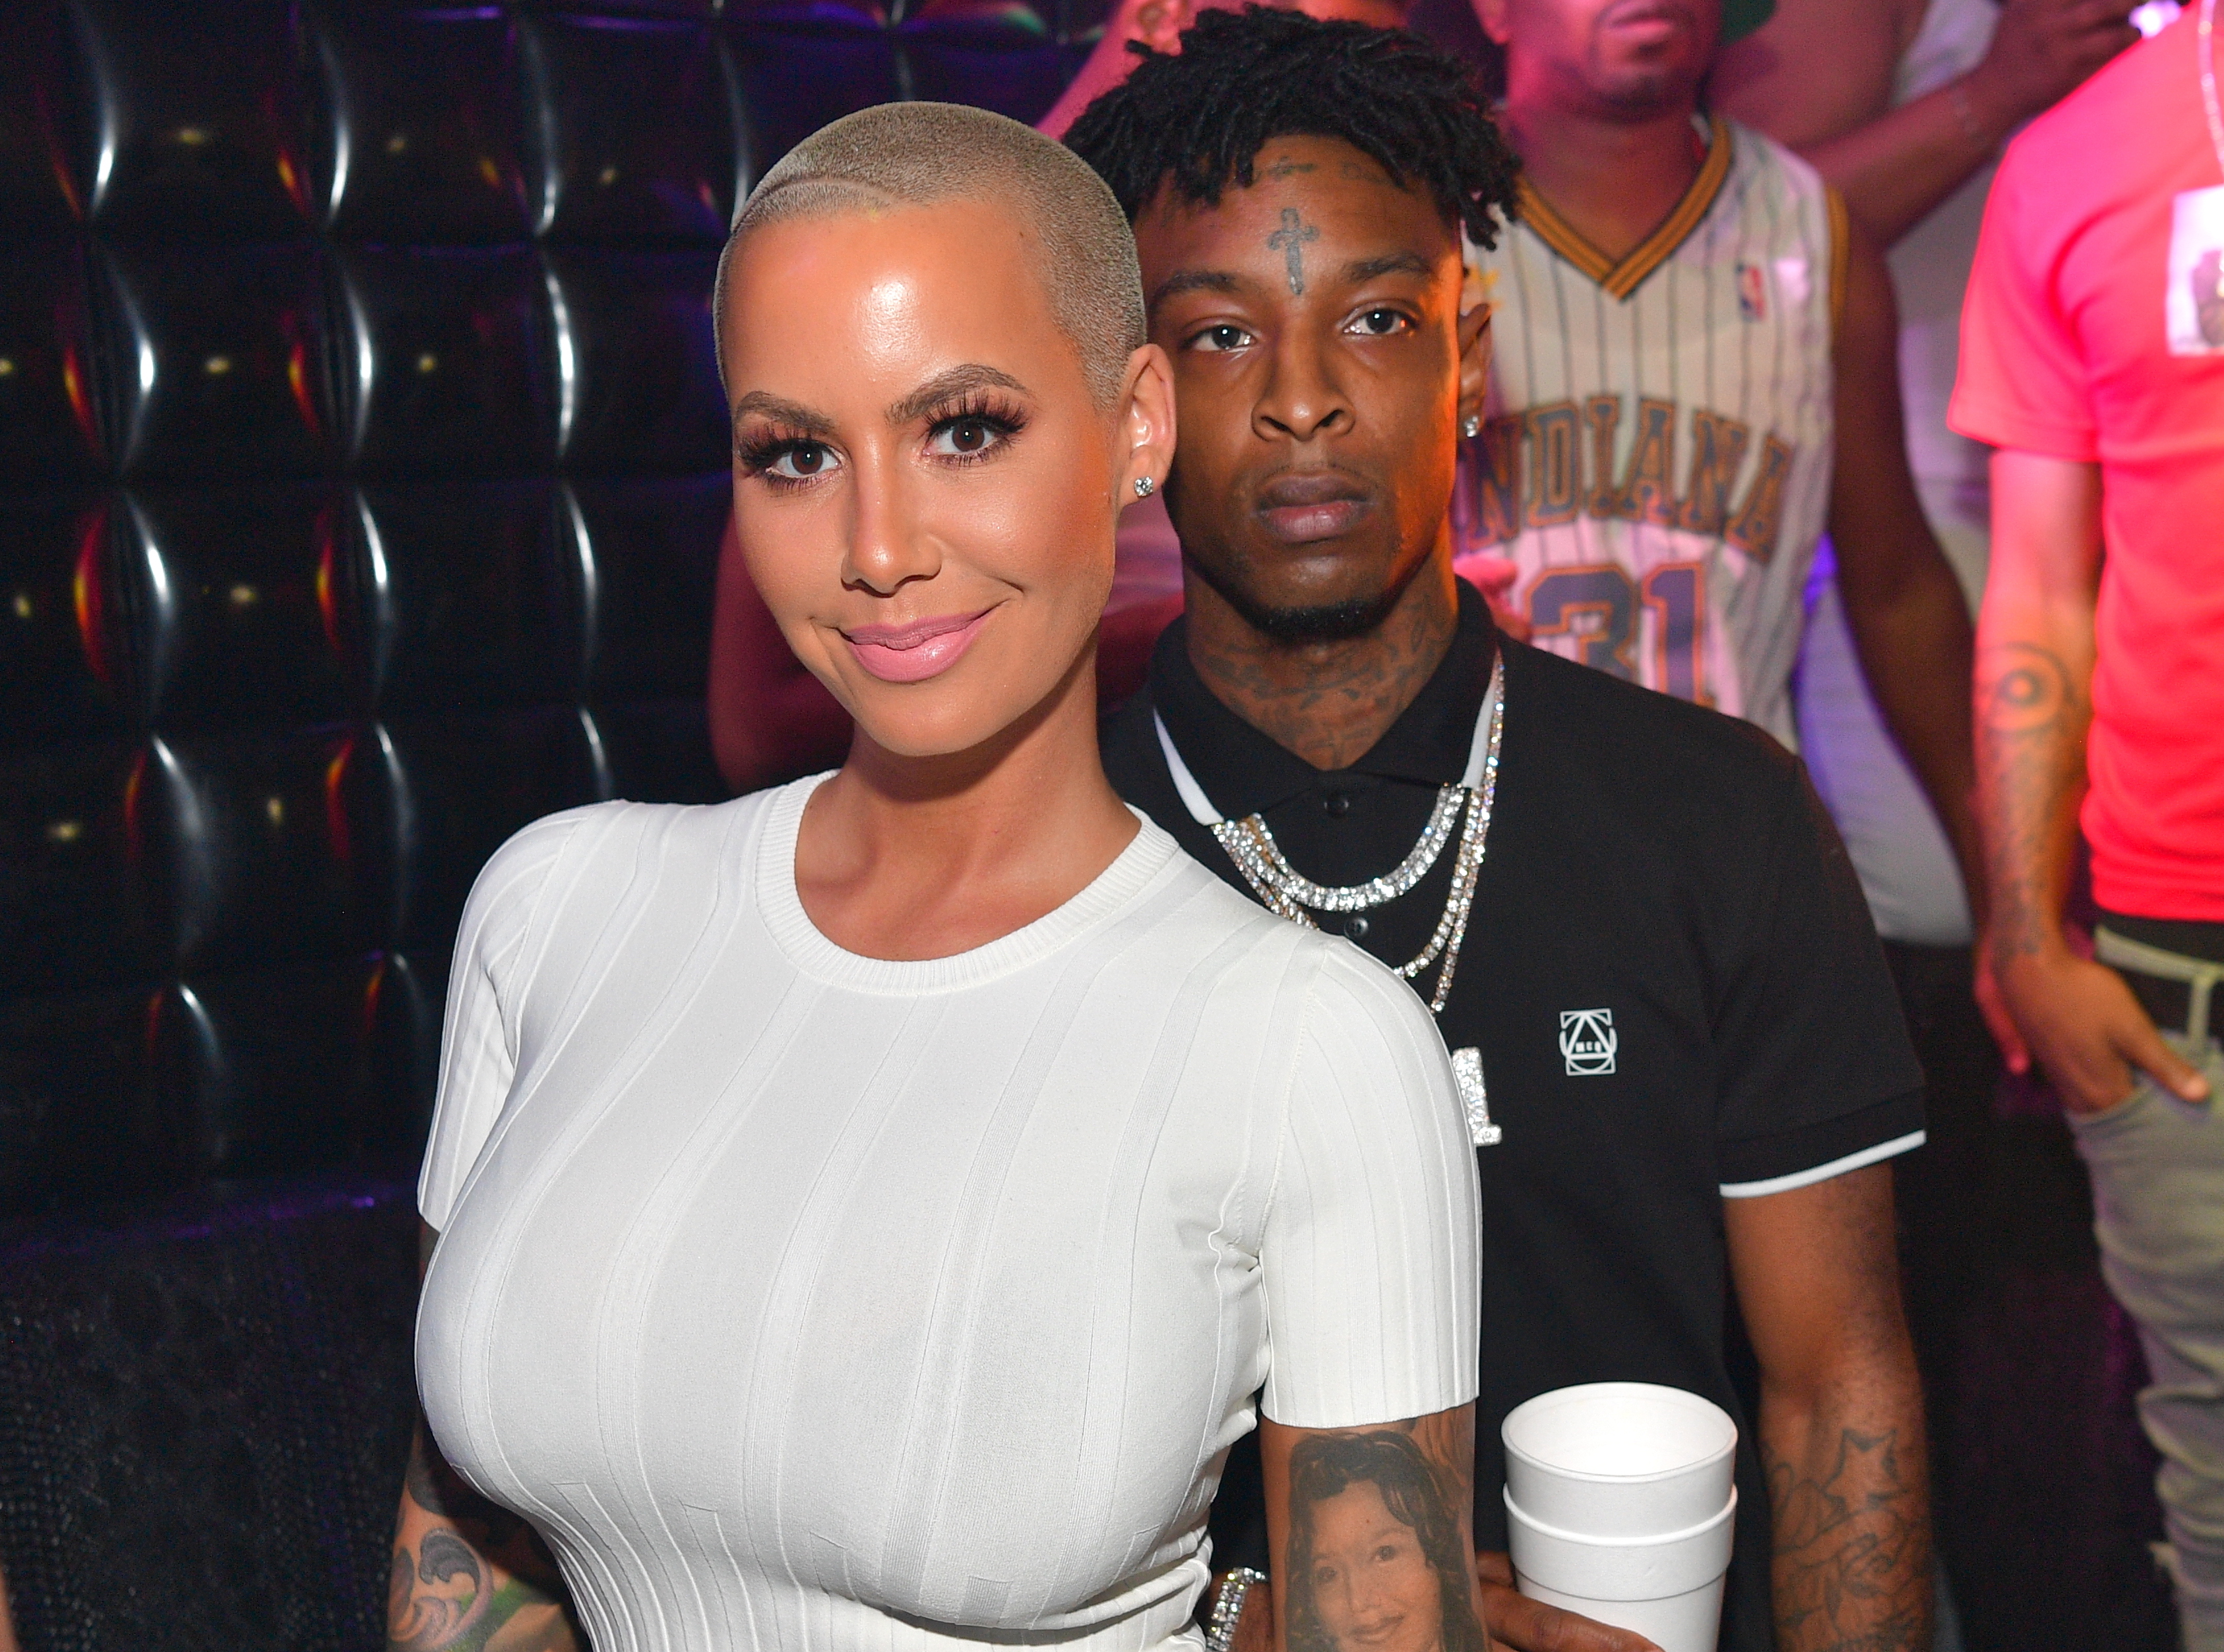 Are Amber Rose and 21 Savage Engaged? See Pic Sparking Speculation